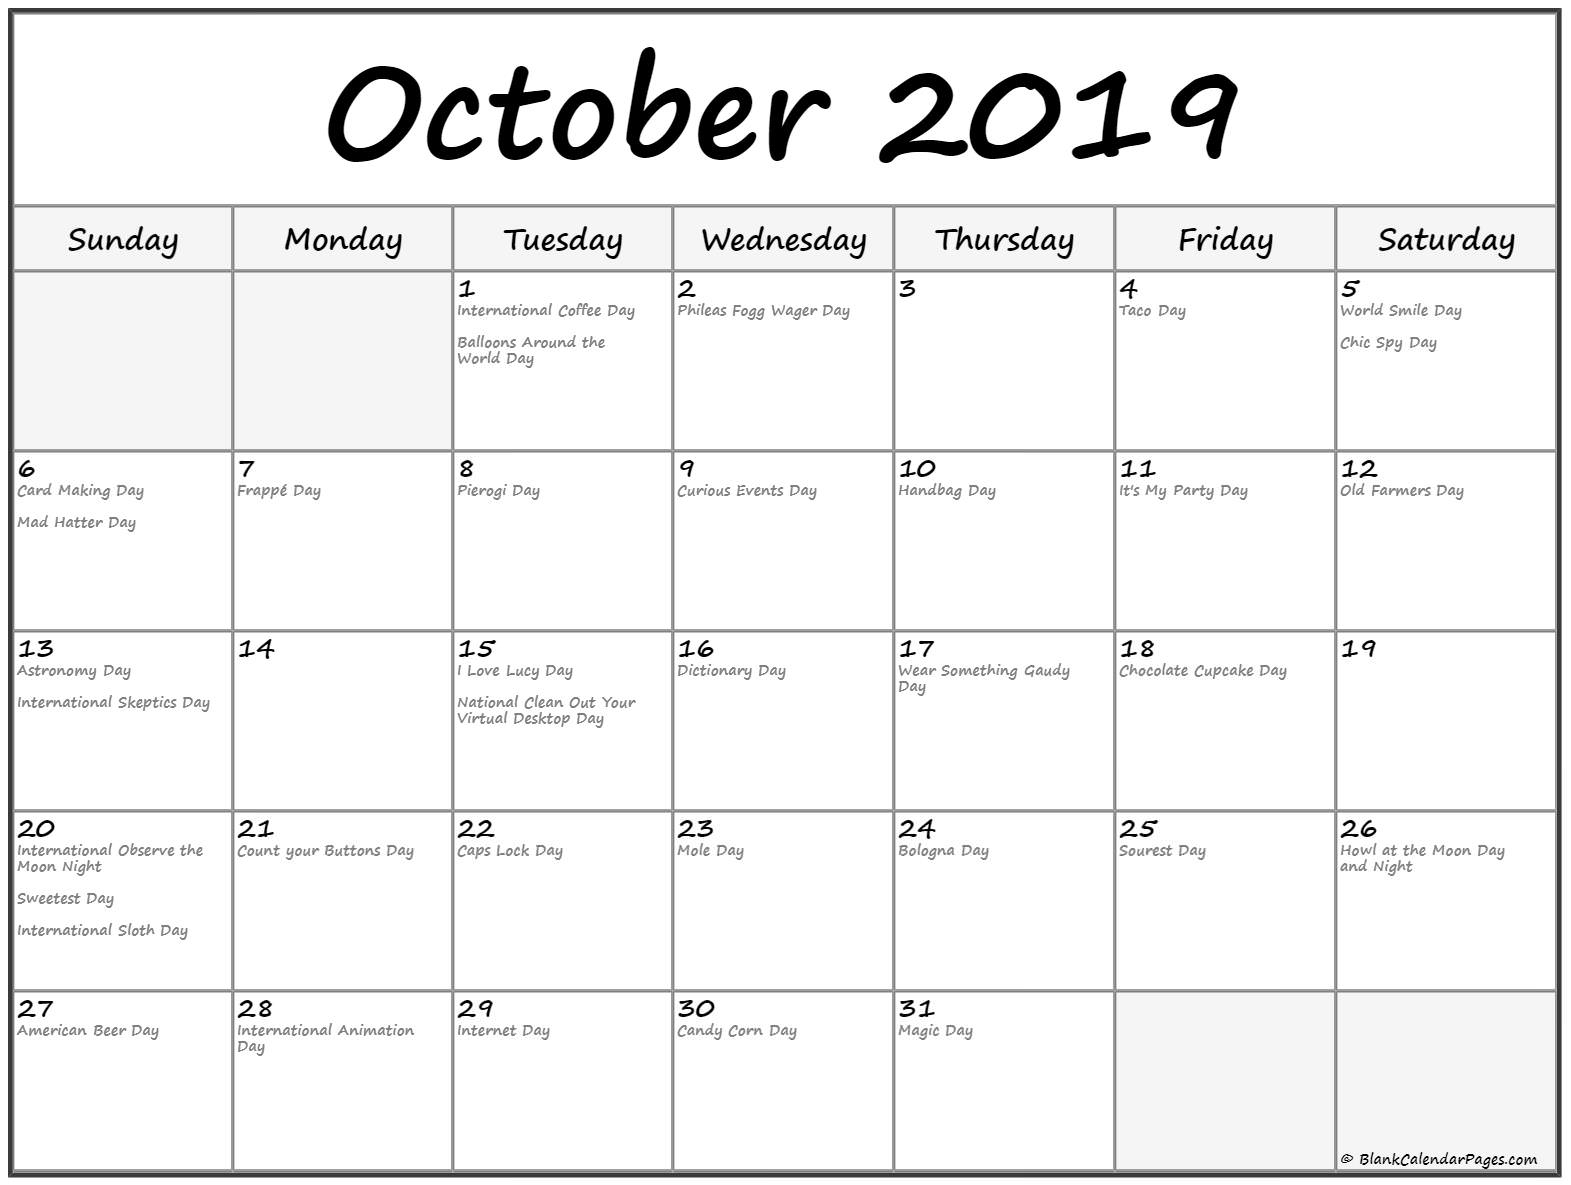 Collection Of October 2019 Calendars With Holidays inside Holiday Themed Cupcake Templates For Calendar